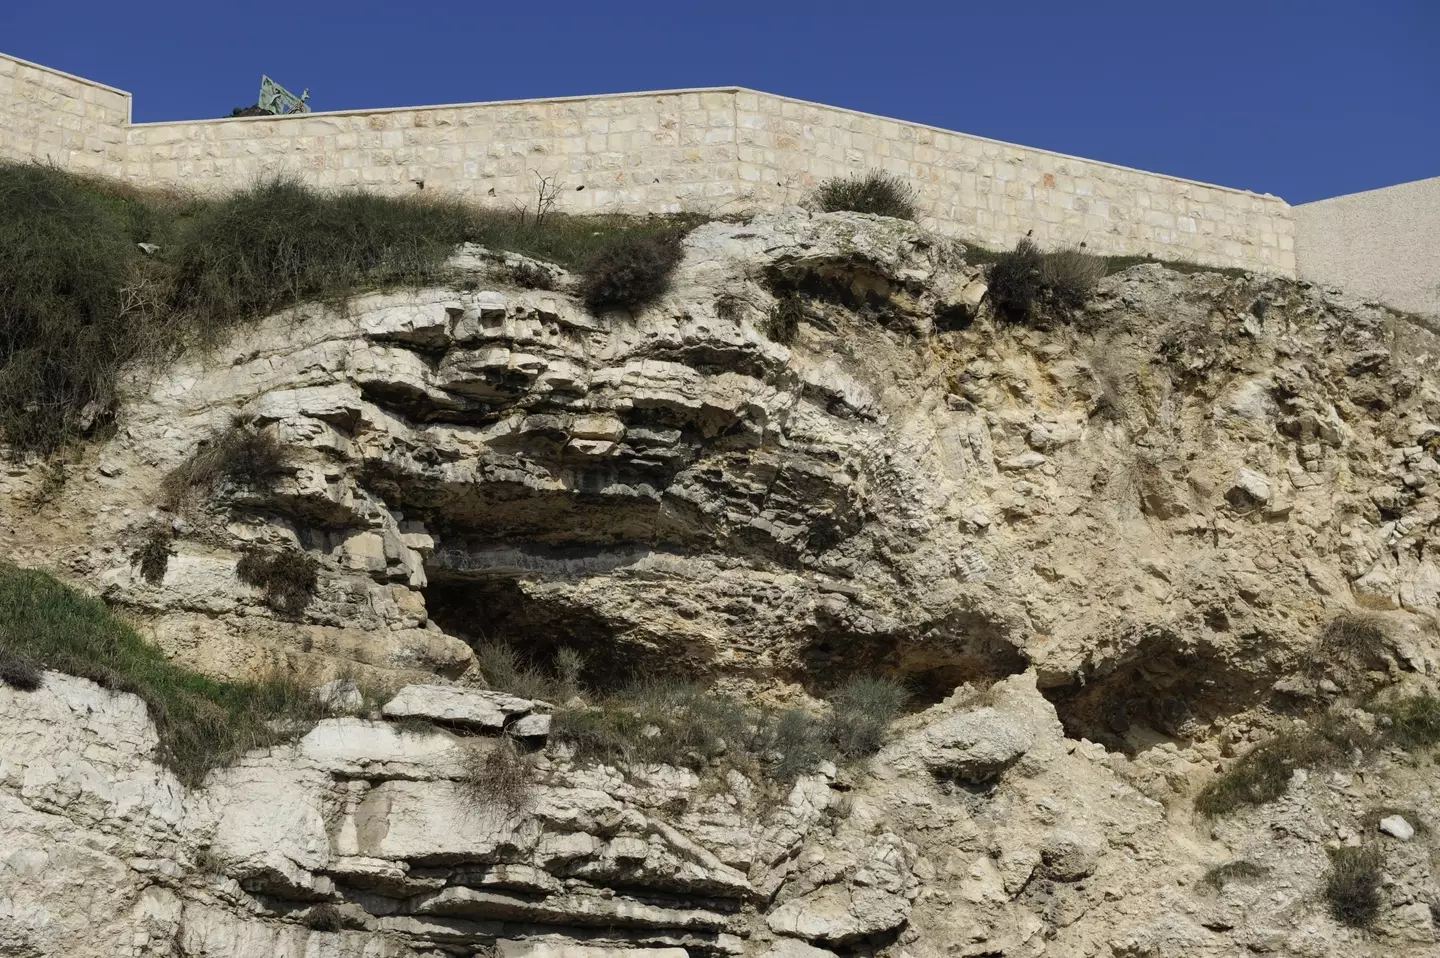 Mound in Israel where some theories say they be the real Golgotha or Calvary where Jesus was crucified.